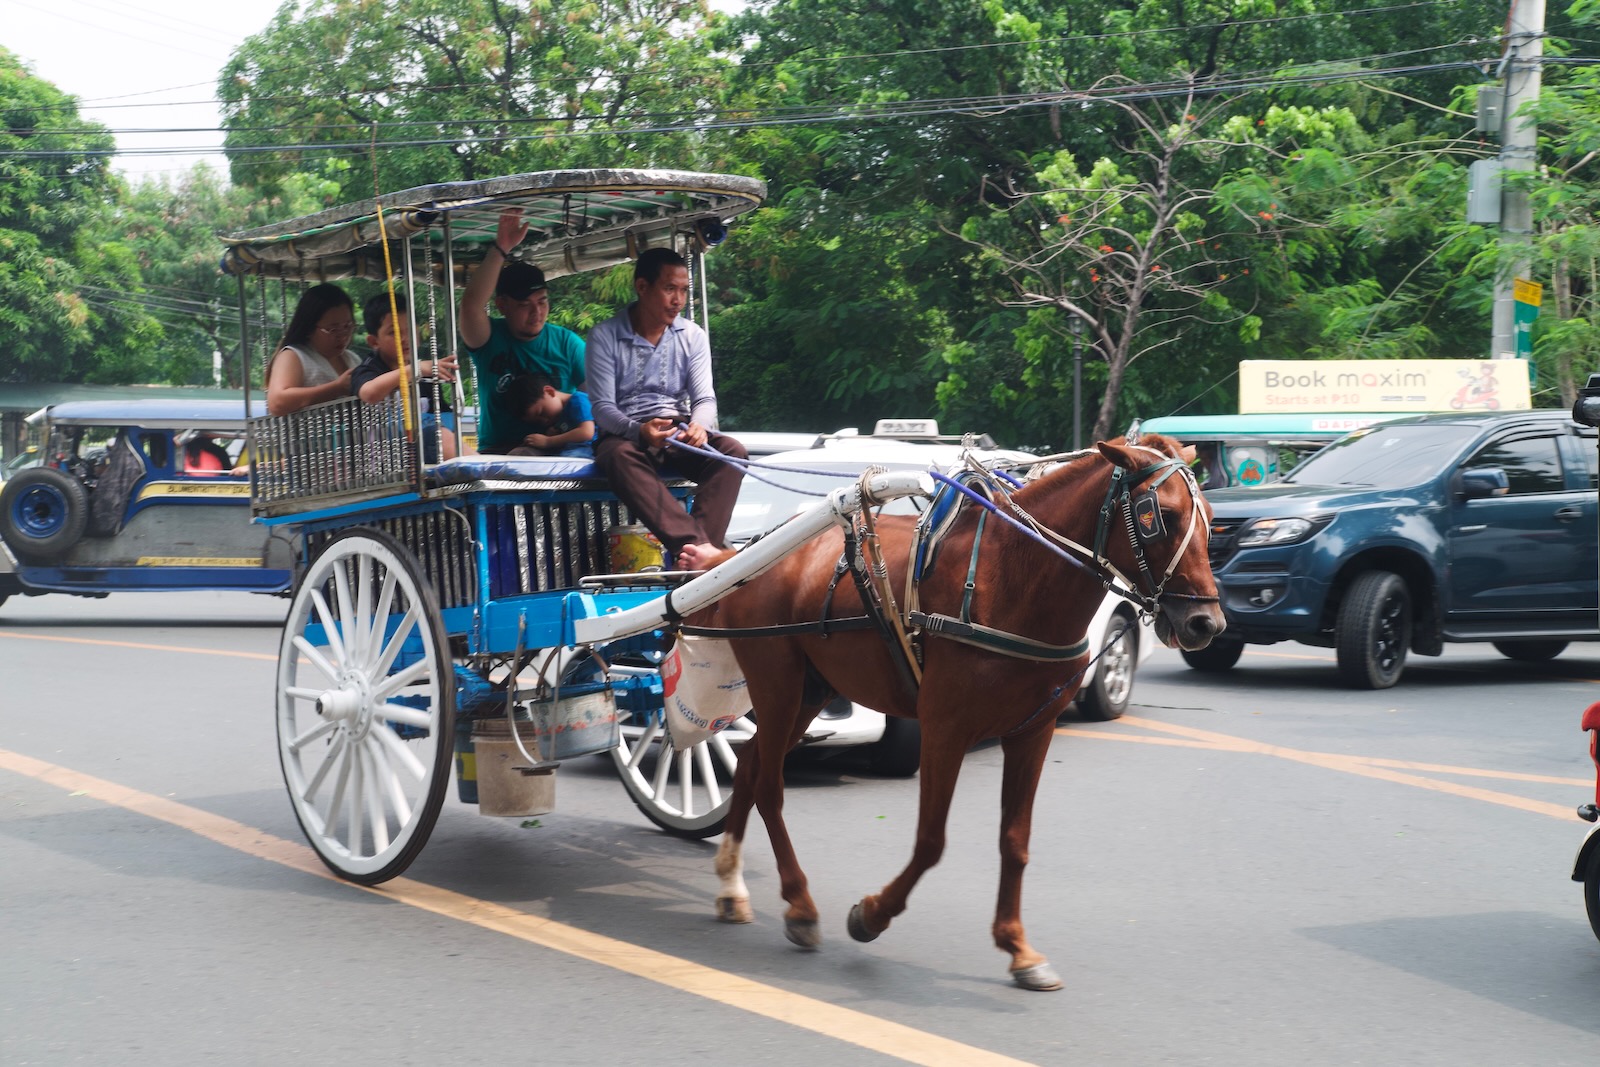 A blue horse-drawn carriage carries a small family through the streets of Manila. Up front sits the driver with bare feet and a bored expression on his face.